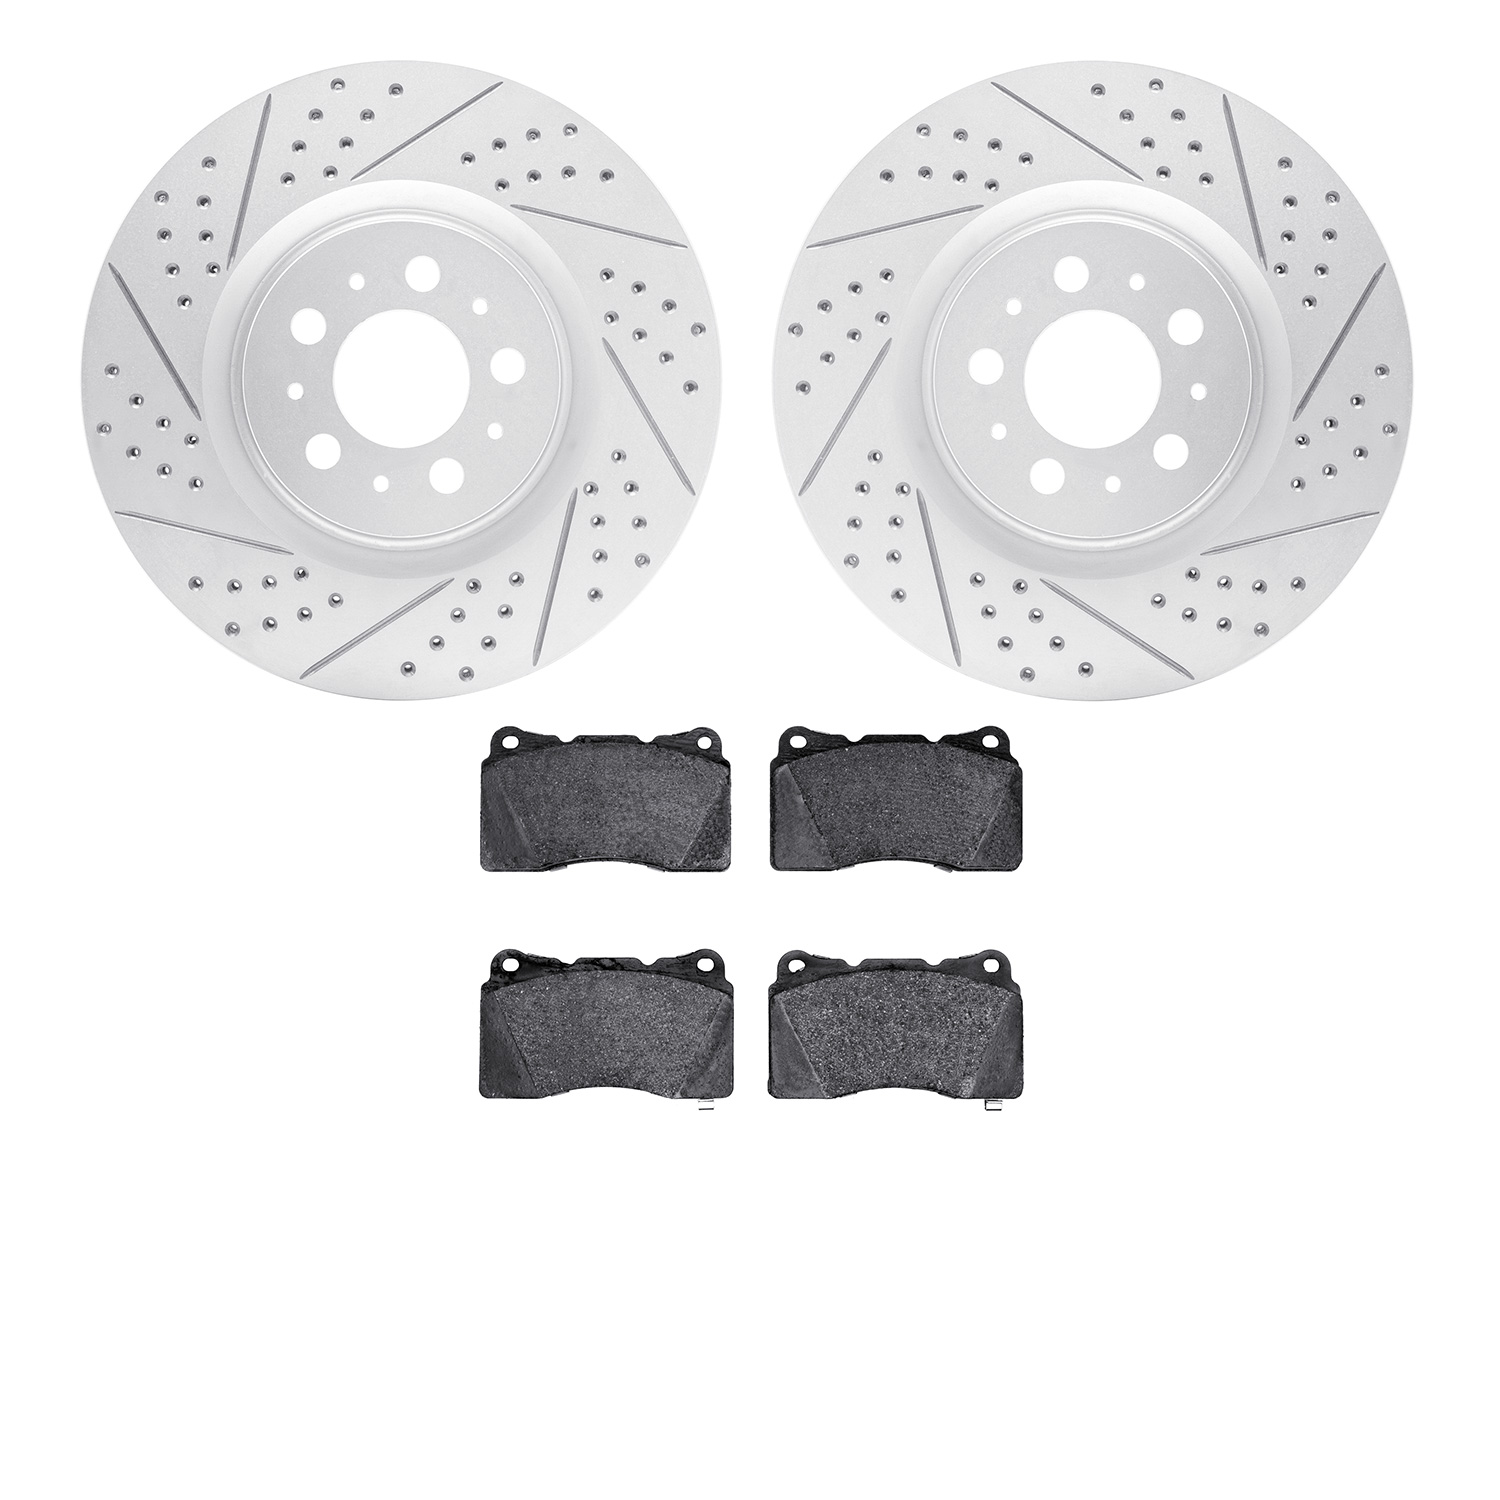 2502-27018 Geoperformance Drilled/Slotted Rotors w/5000 Advanced Brake Pads Kit, 2004-2007 Volvo, Position: Front